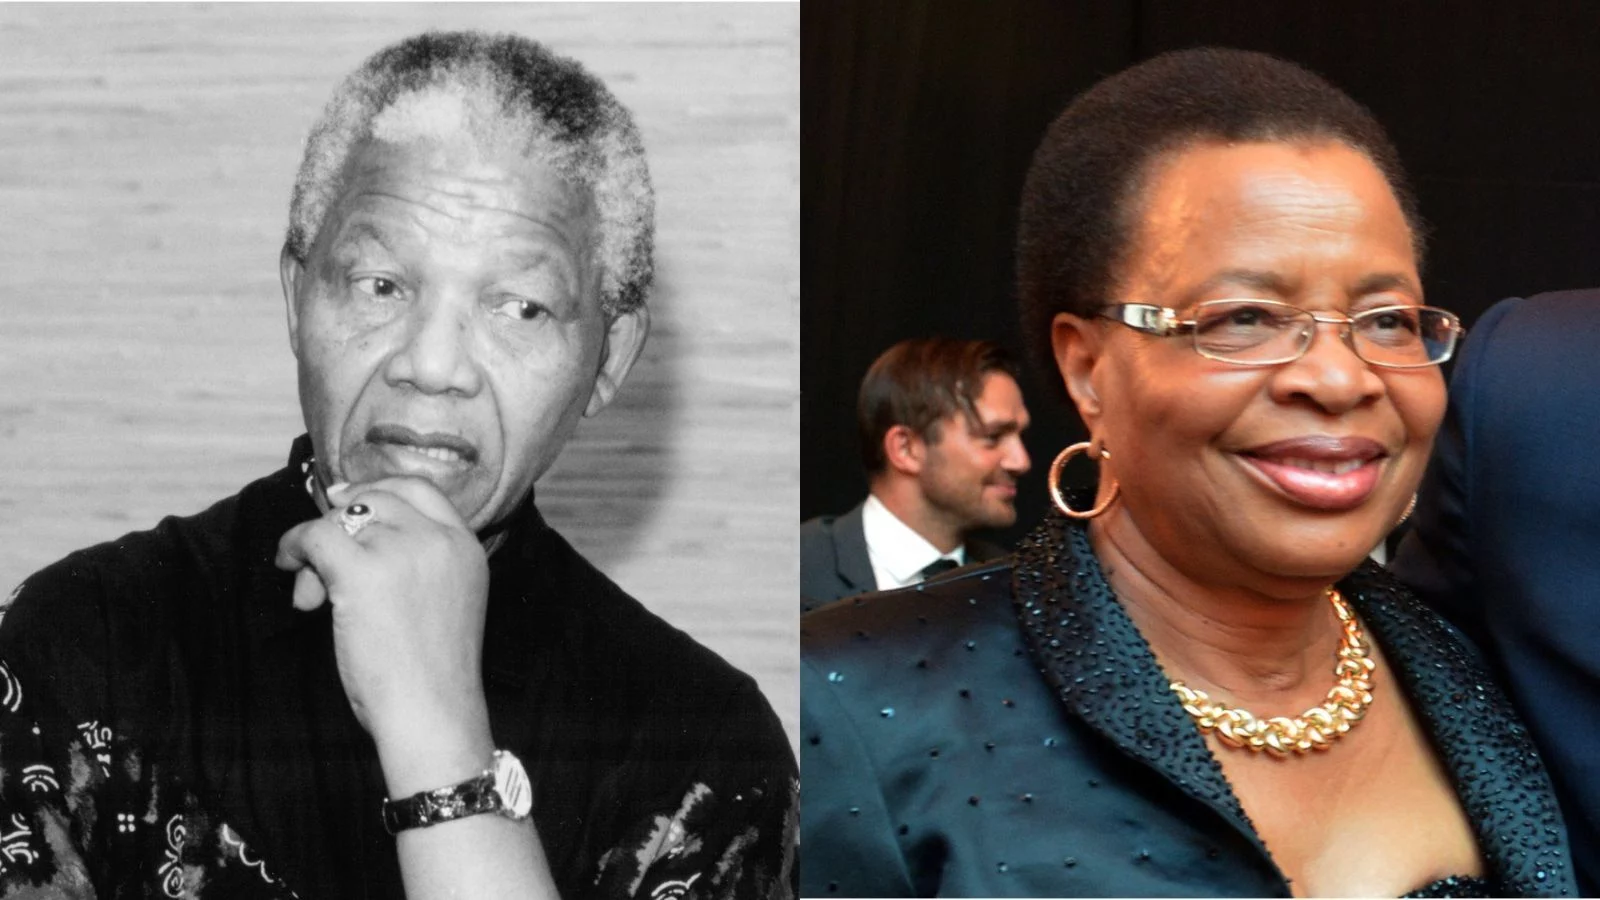 A black and white image of Nelson Mandela together with a coloured image of Graca Machel. 